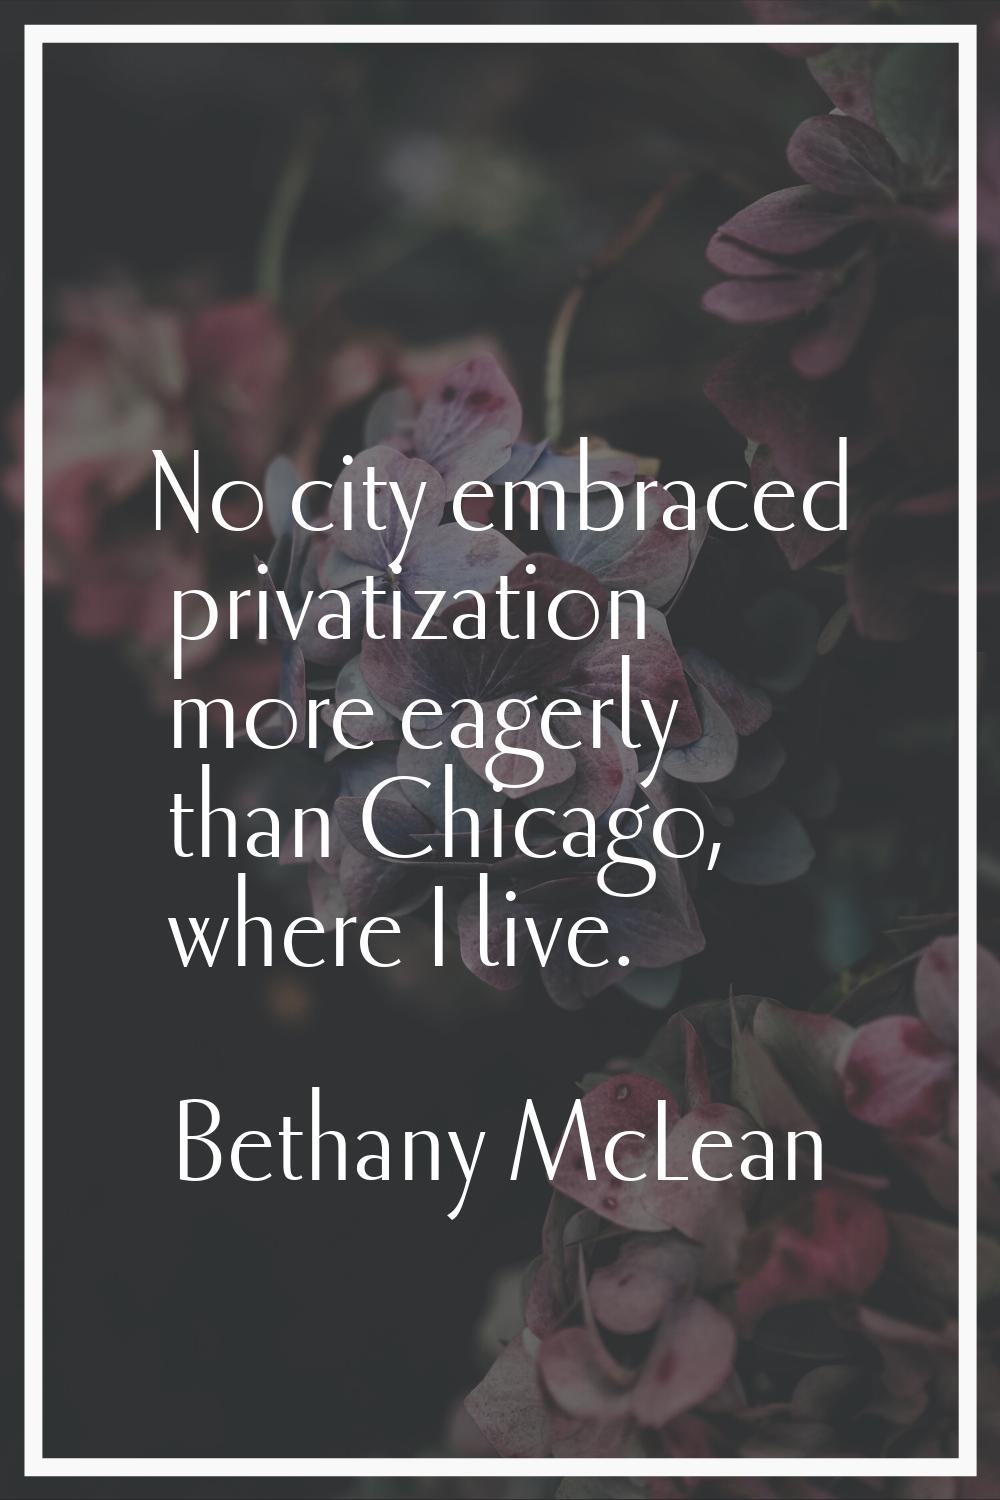 No city embraced privatization more eagerly than Chicago, where I live.